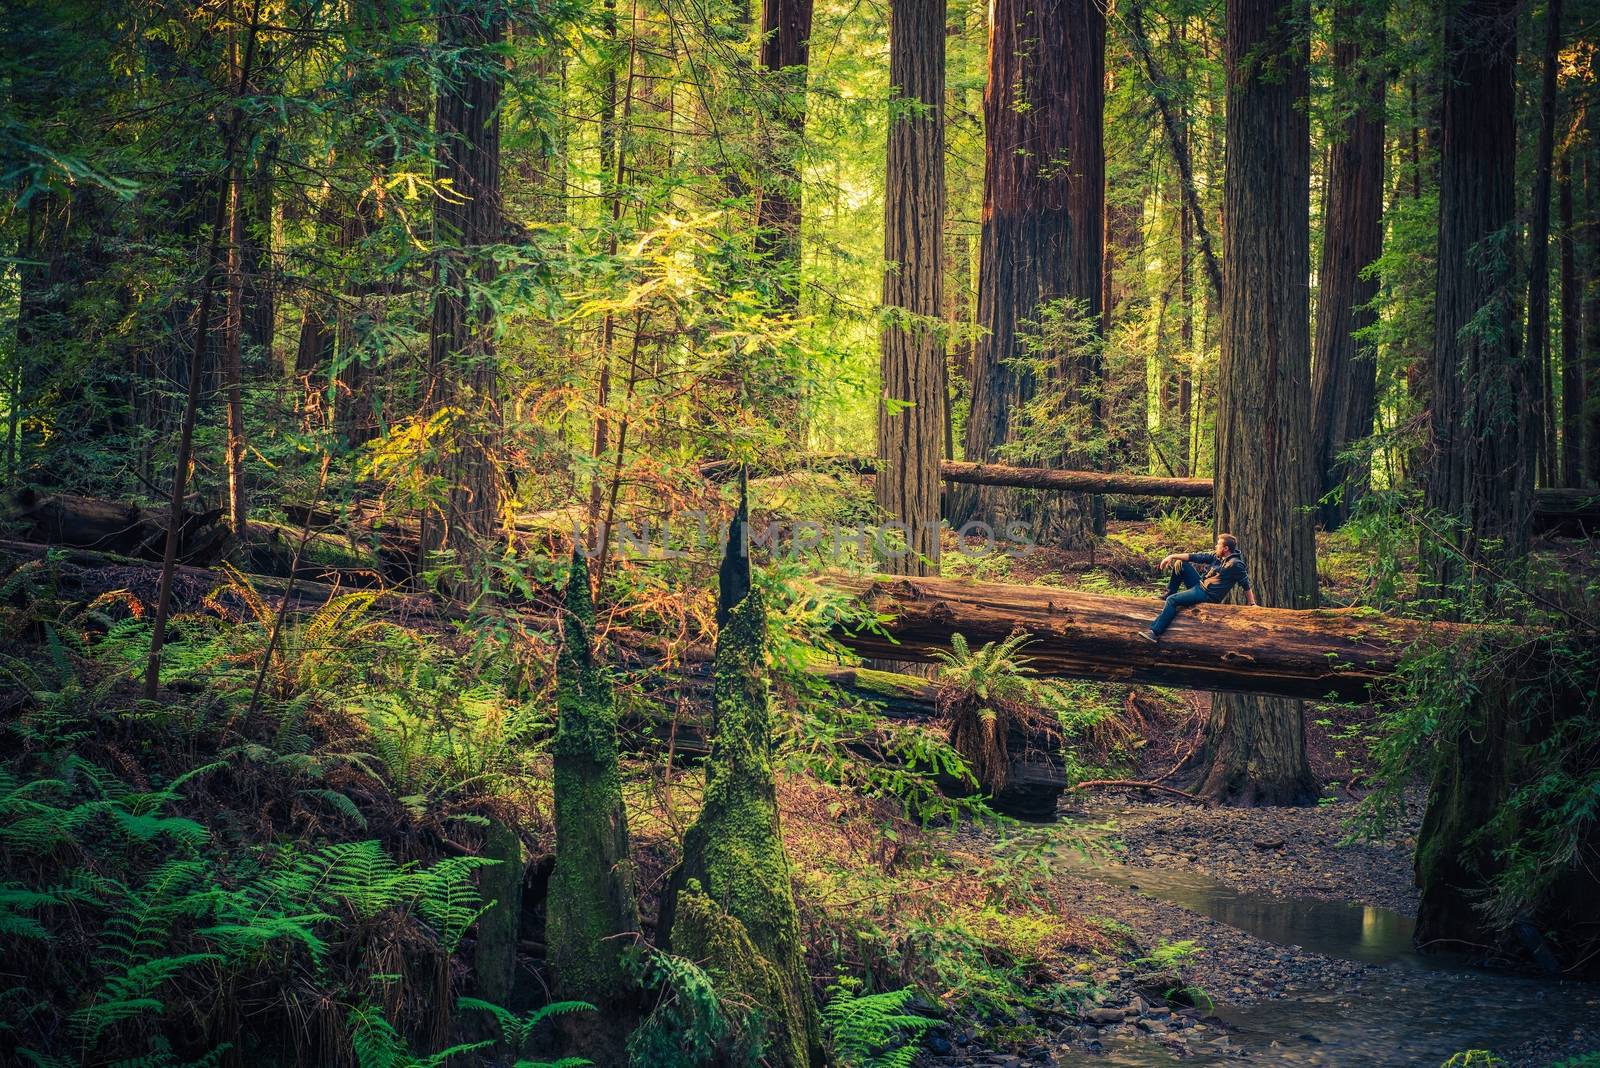 Tourist Resting on the Redwood Fallen Tree and Enjoying Redwood Forest Scenery During Sunset.